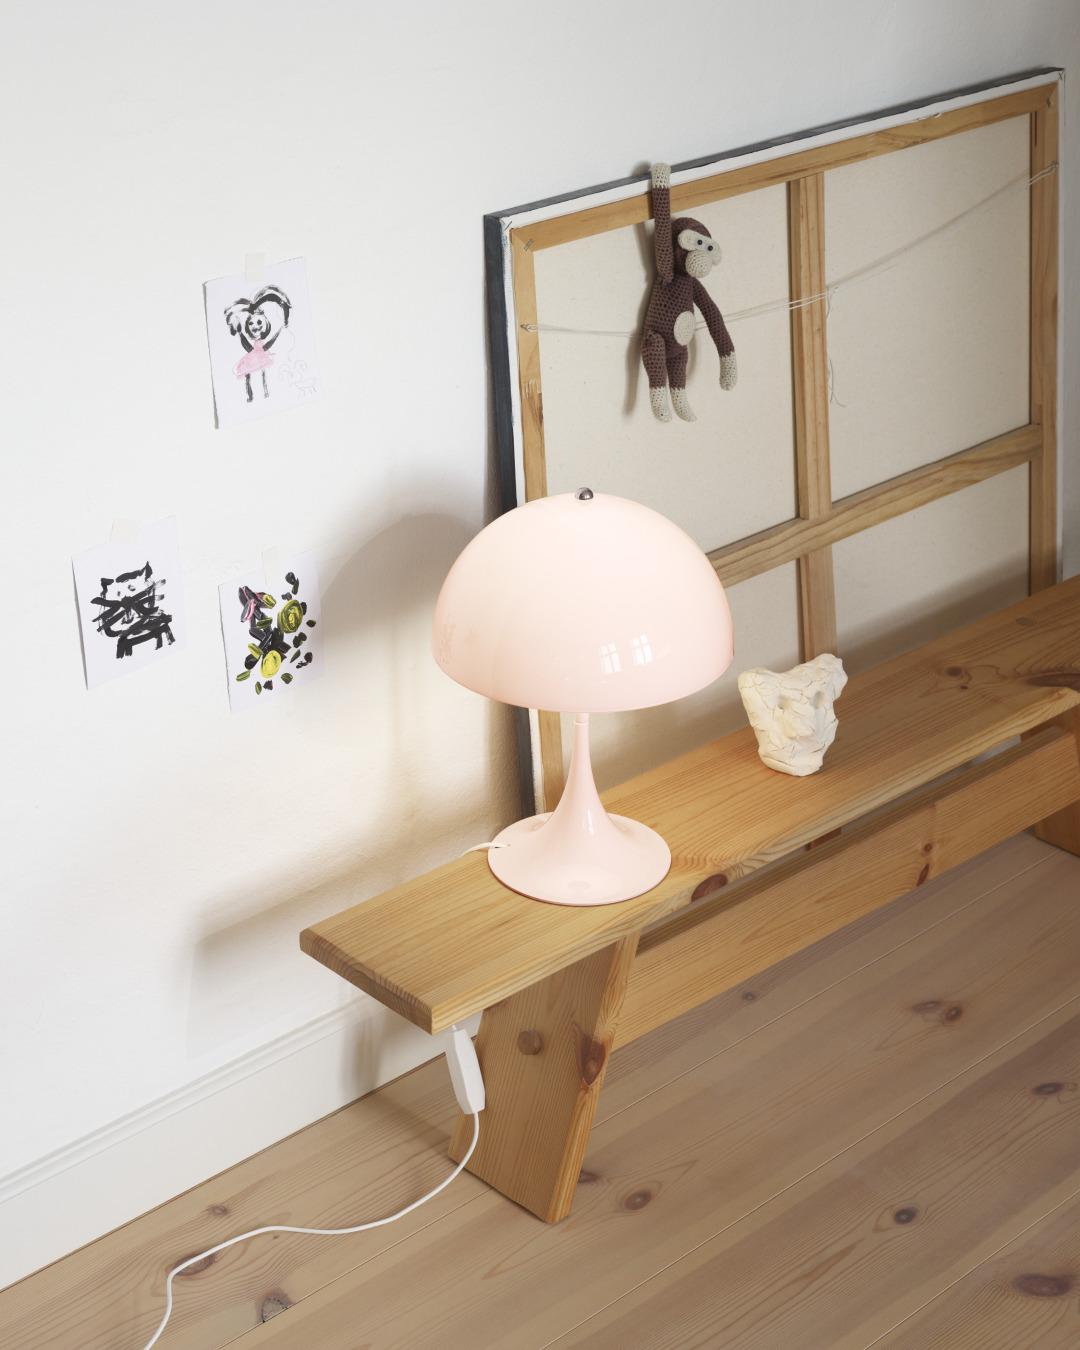 Verner Panton 'Panthella 250' Table Lamp for Louis Poulsen in Opal Pale Rose.

The 'Panthella 250' LED table lamp uses Verner Panton's original drawings to produce an organically shaped lamp with an opal acrylic shade. The Panthella table lamp,